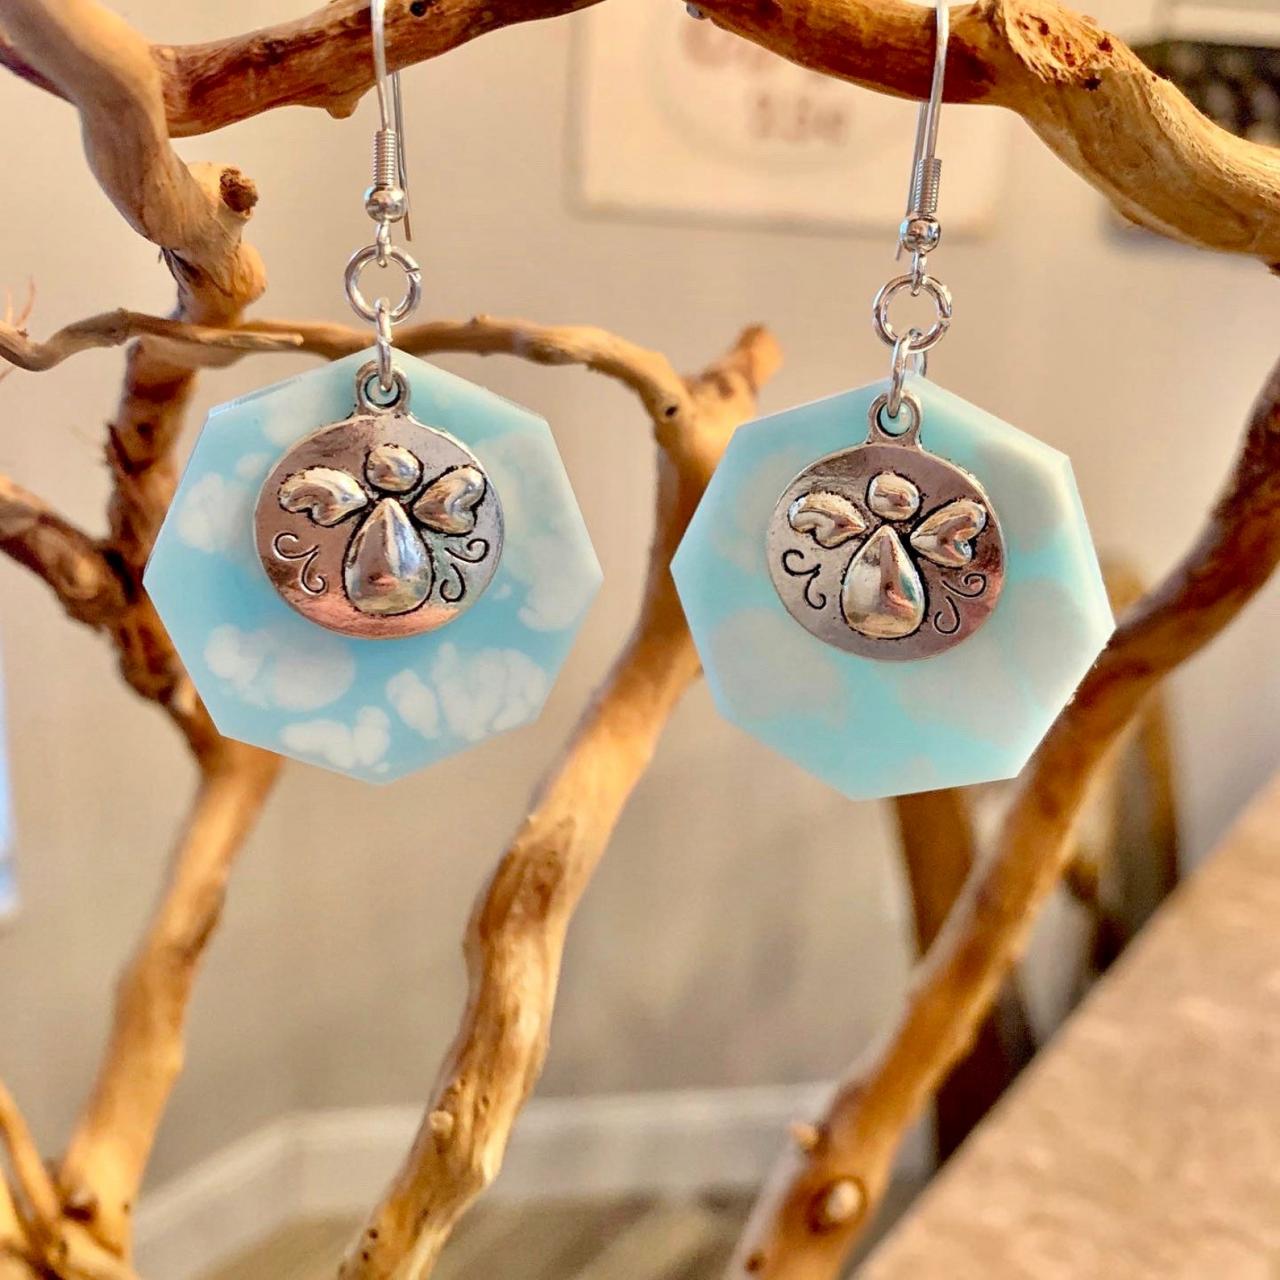 Angel Earrings,clouds,resin Art,angel Charm,angelic, Jewelry For Women,spiritual,heaven Earrings, Jewelry For A Special Occasion,gift,heaven